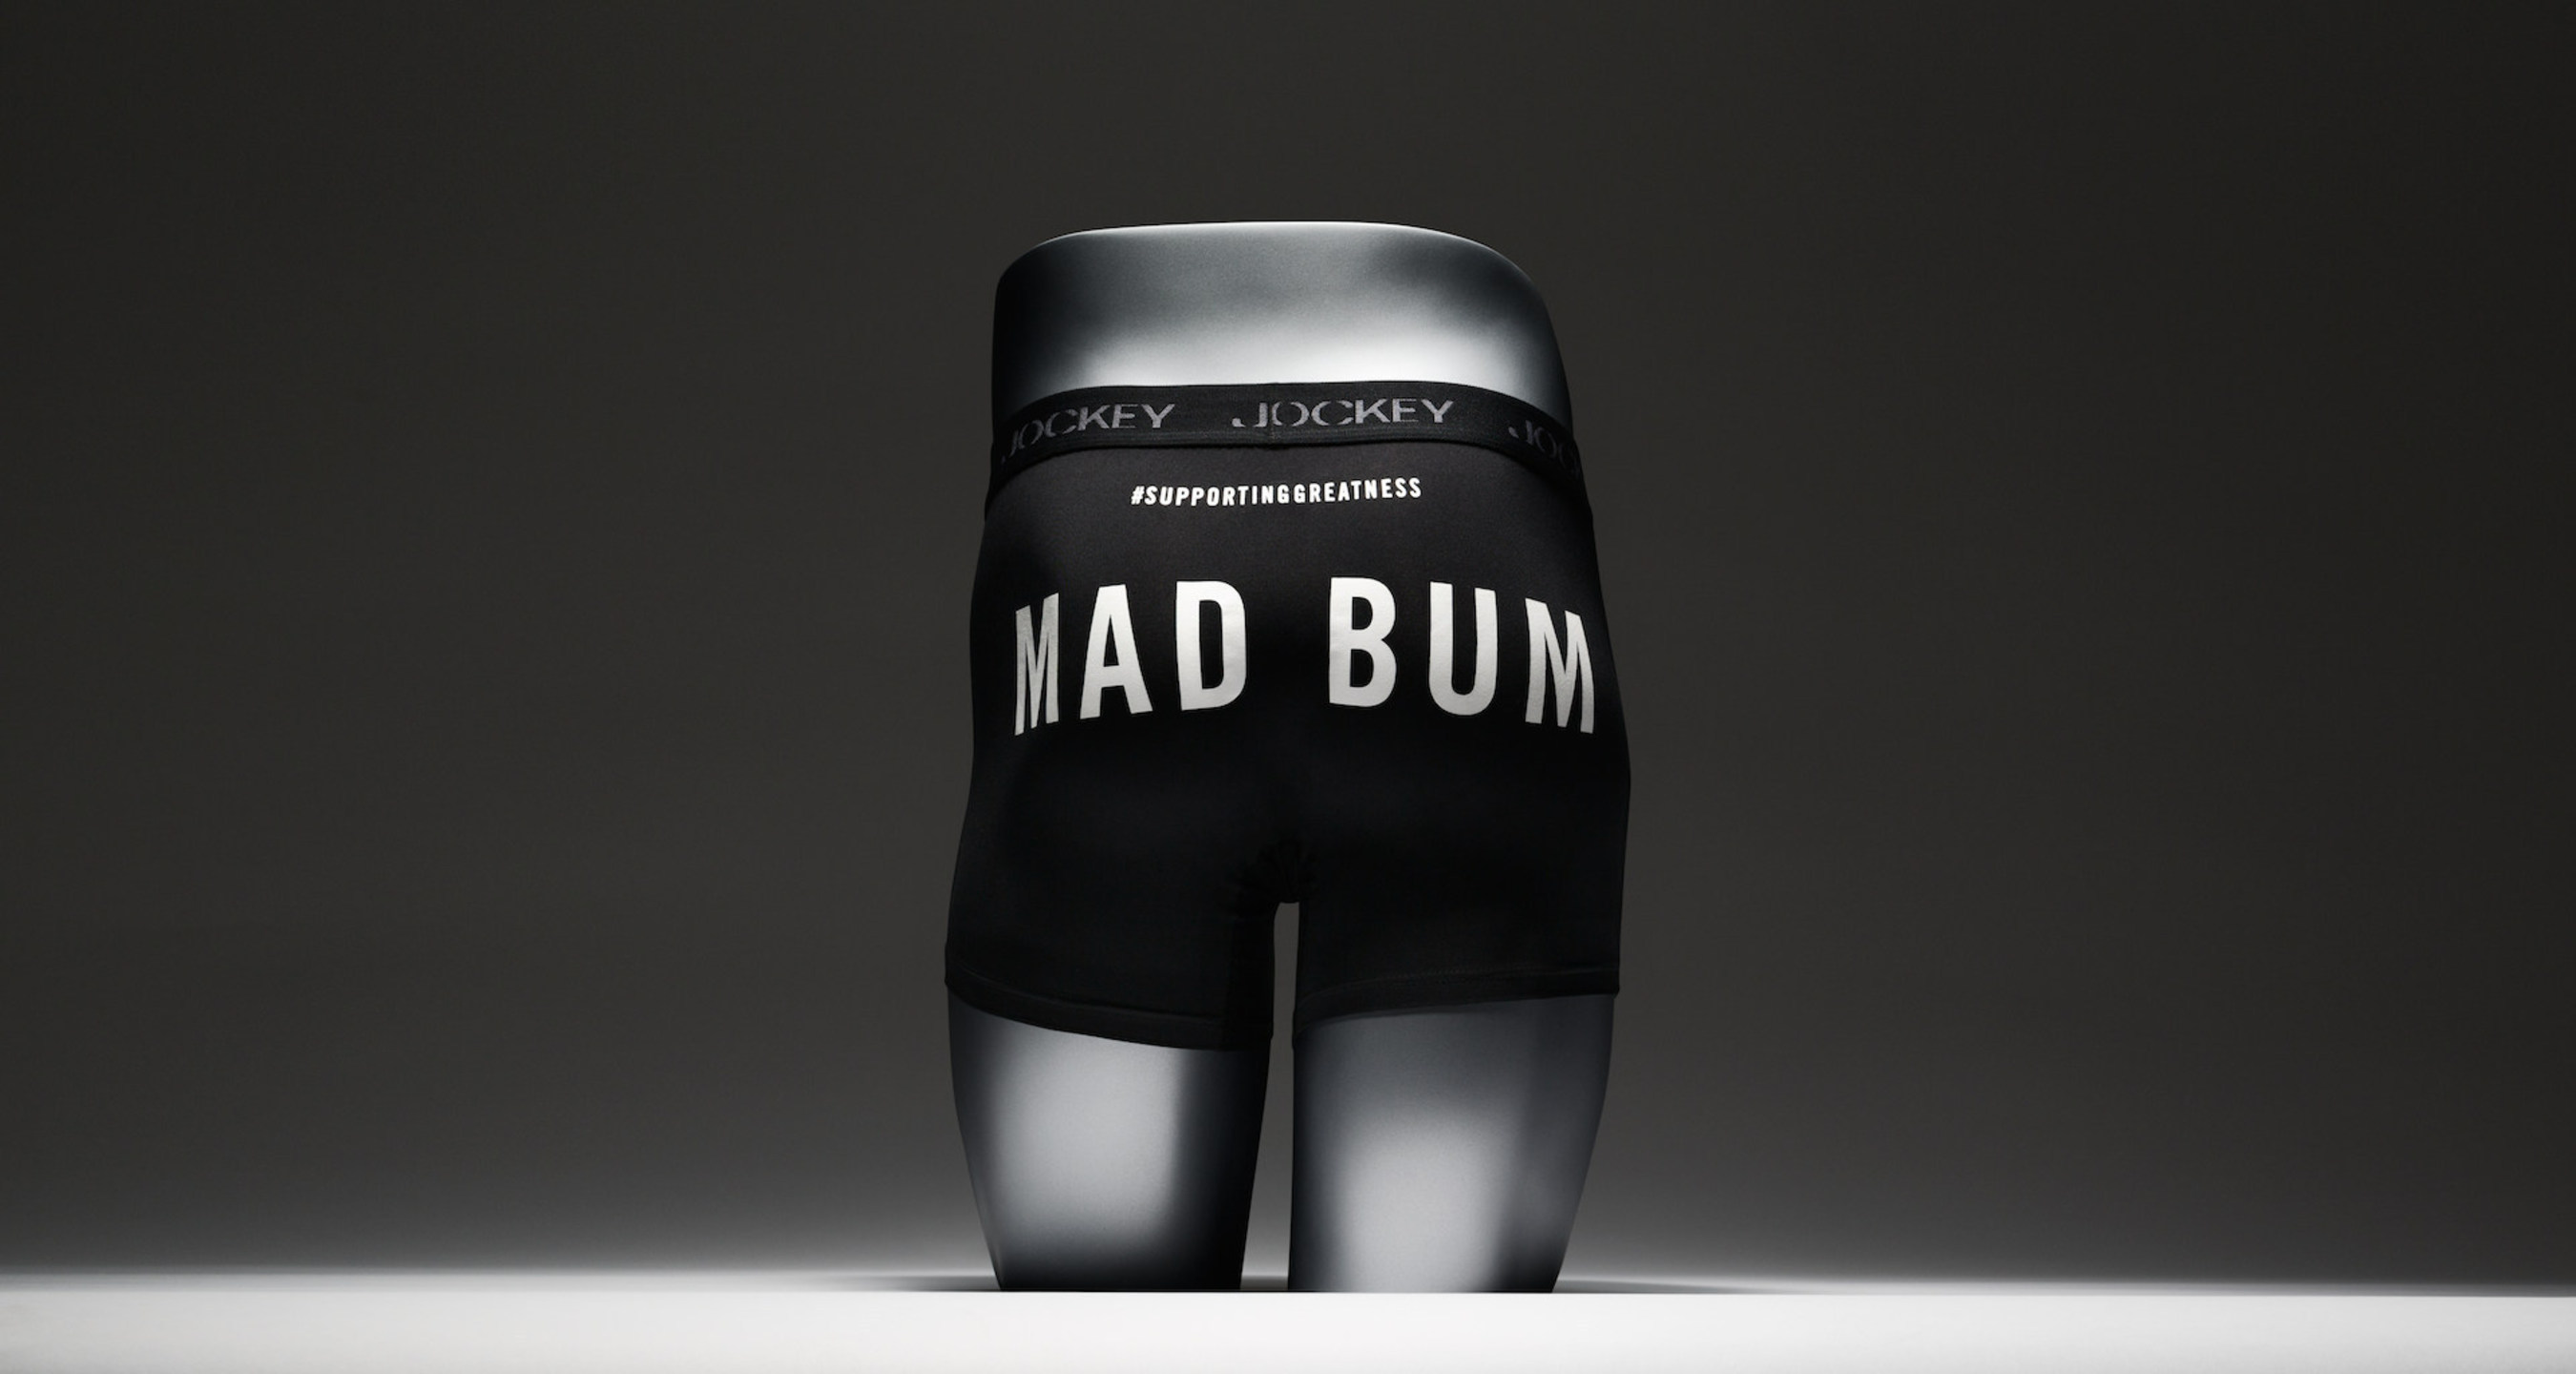 JOCKEY SUPPORTS MADISON BUMGARNER'S GREATNESS WITH "MAD BUM" UNDERWEAR, AS PART OF #SUPPORTINGGREATNESS CAMPAIGN